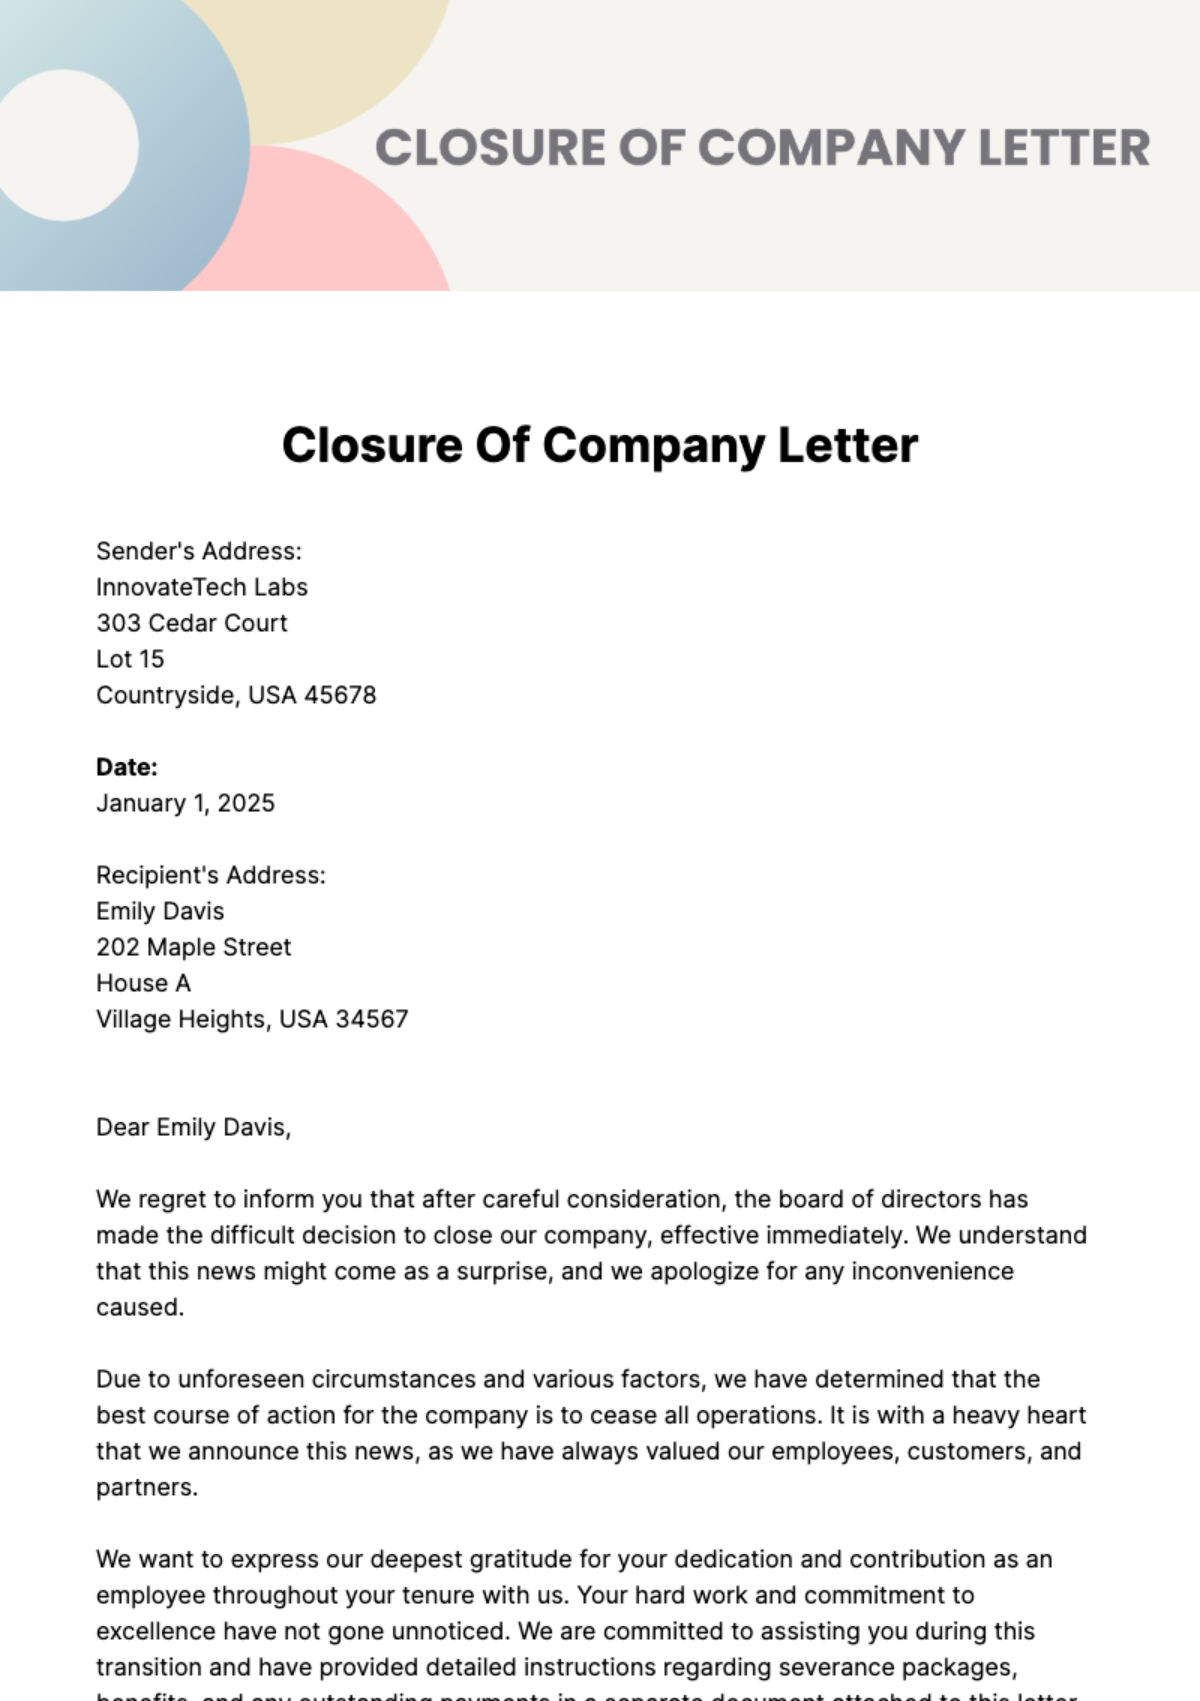 Closure Of Company Letter Template